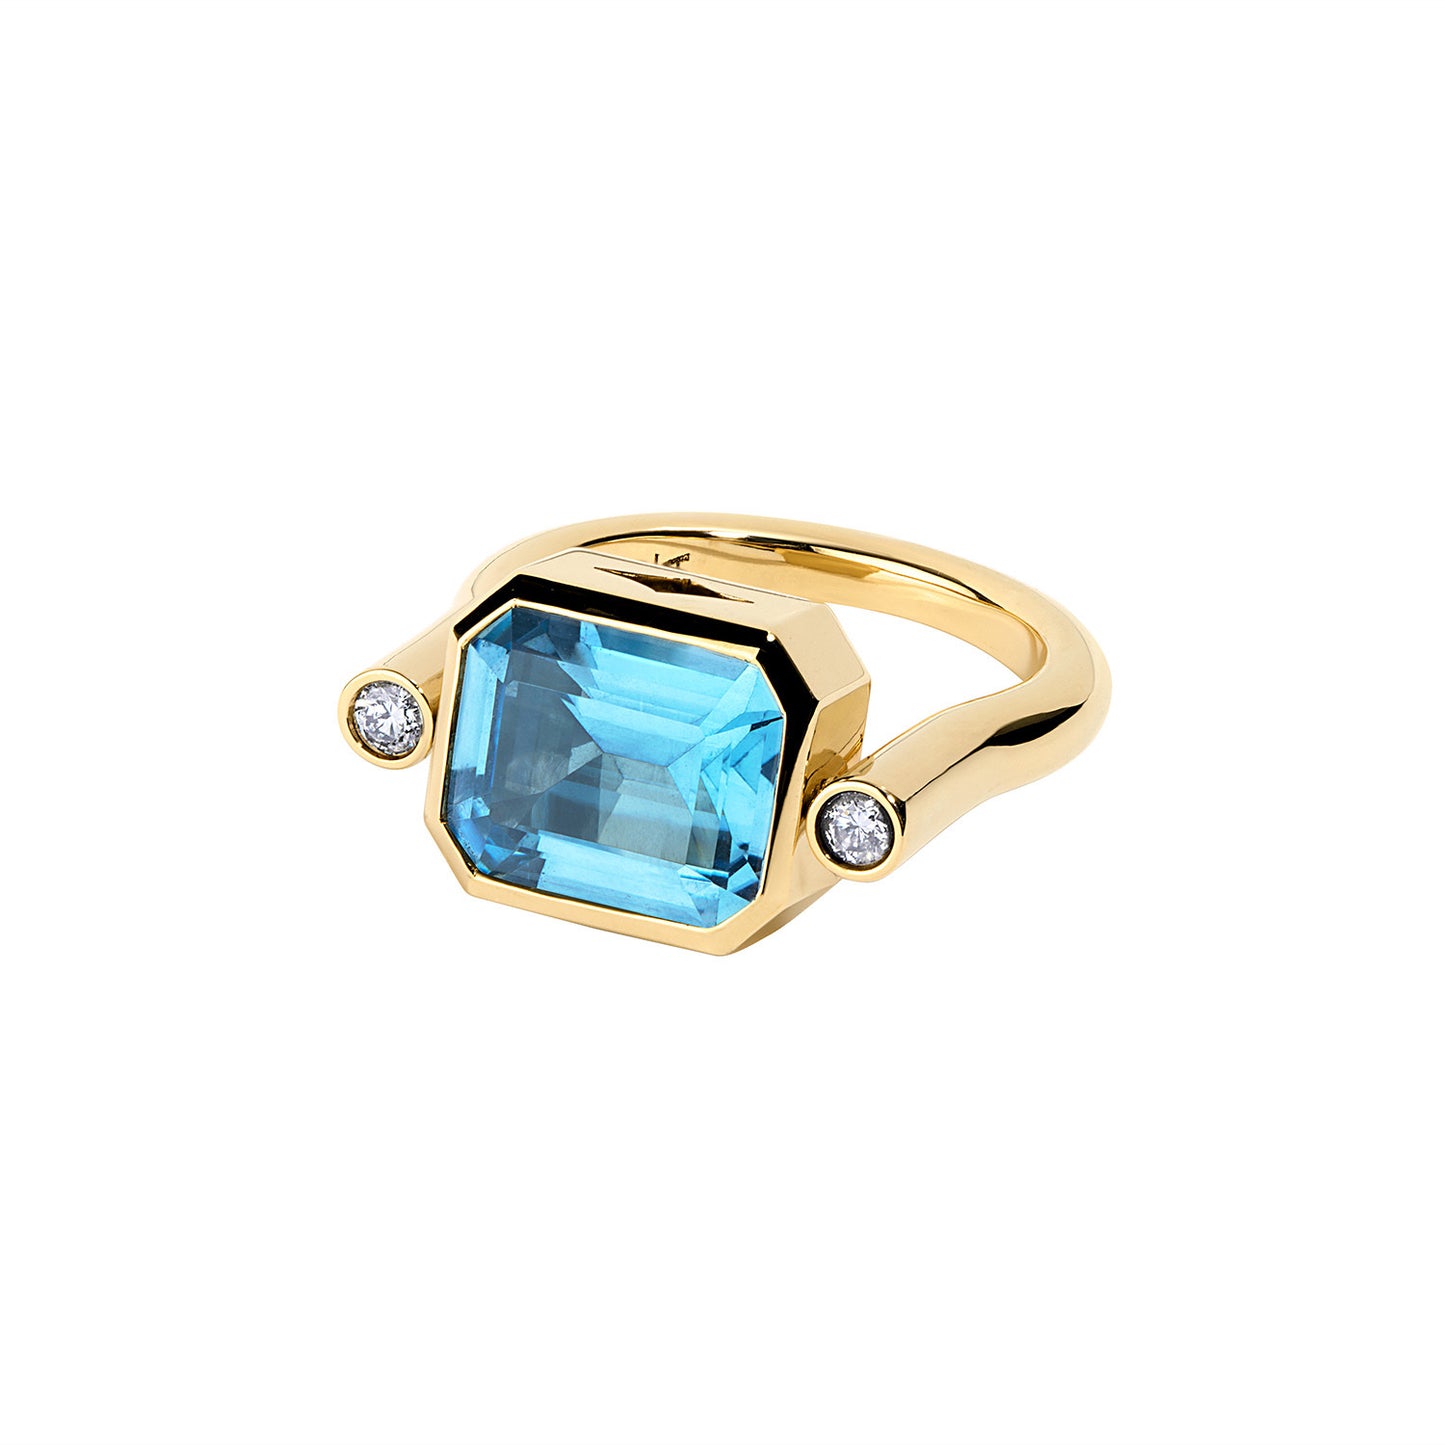 18k yellow gold swivel signet ring with blue topaz and two diamonds, designed by Jillian Abboud. Wearable as a ring or pendant, with customizable size and stones. Crafted in New York.